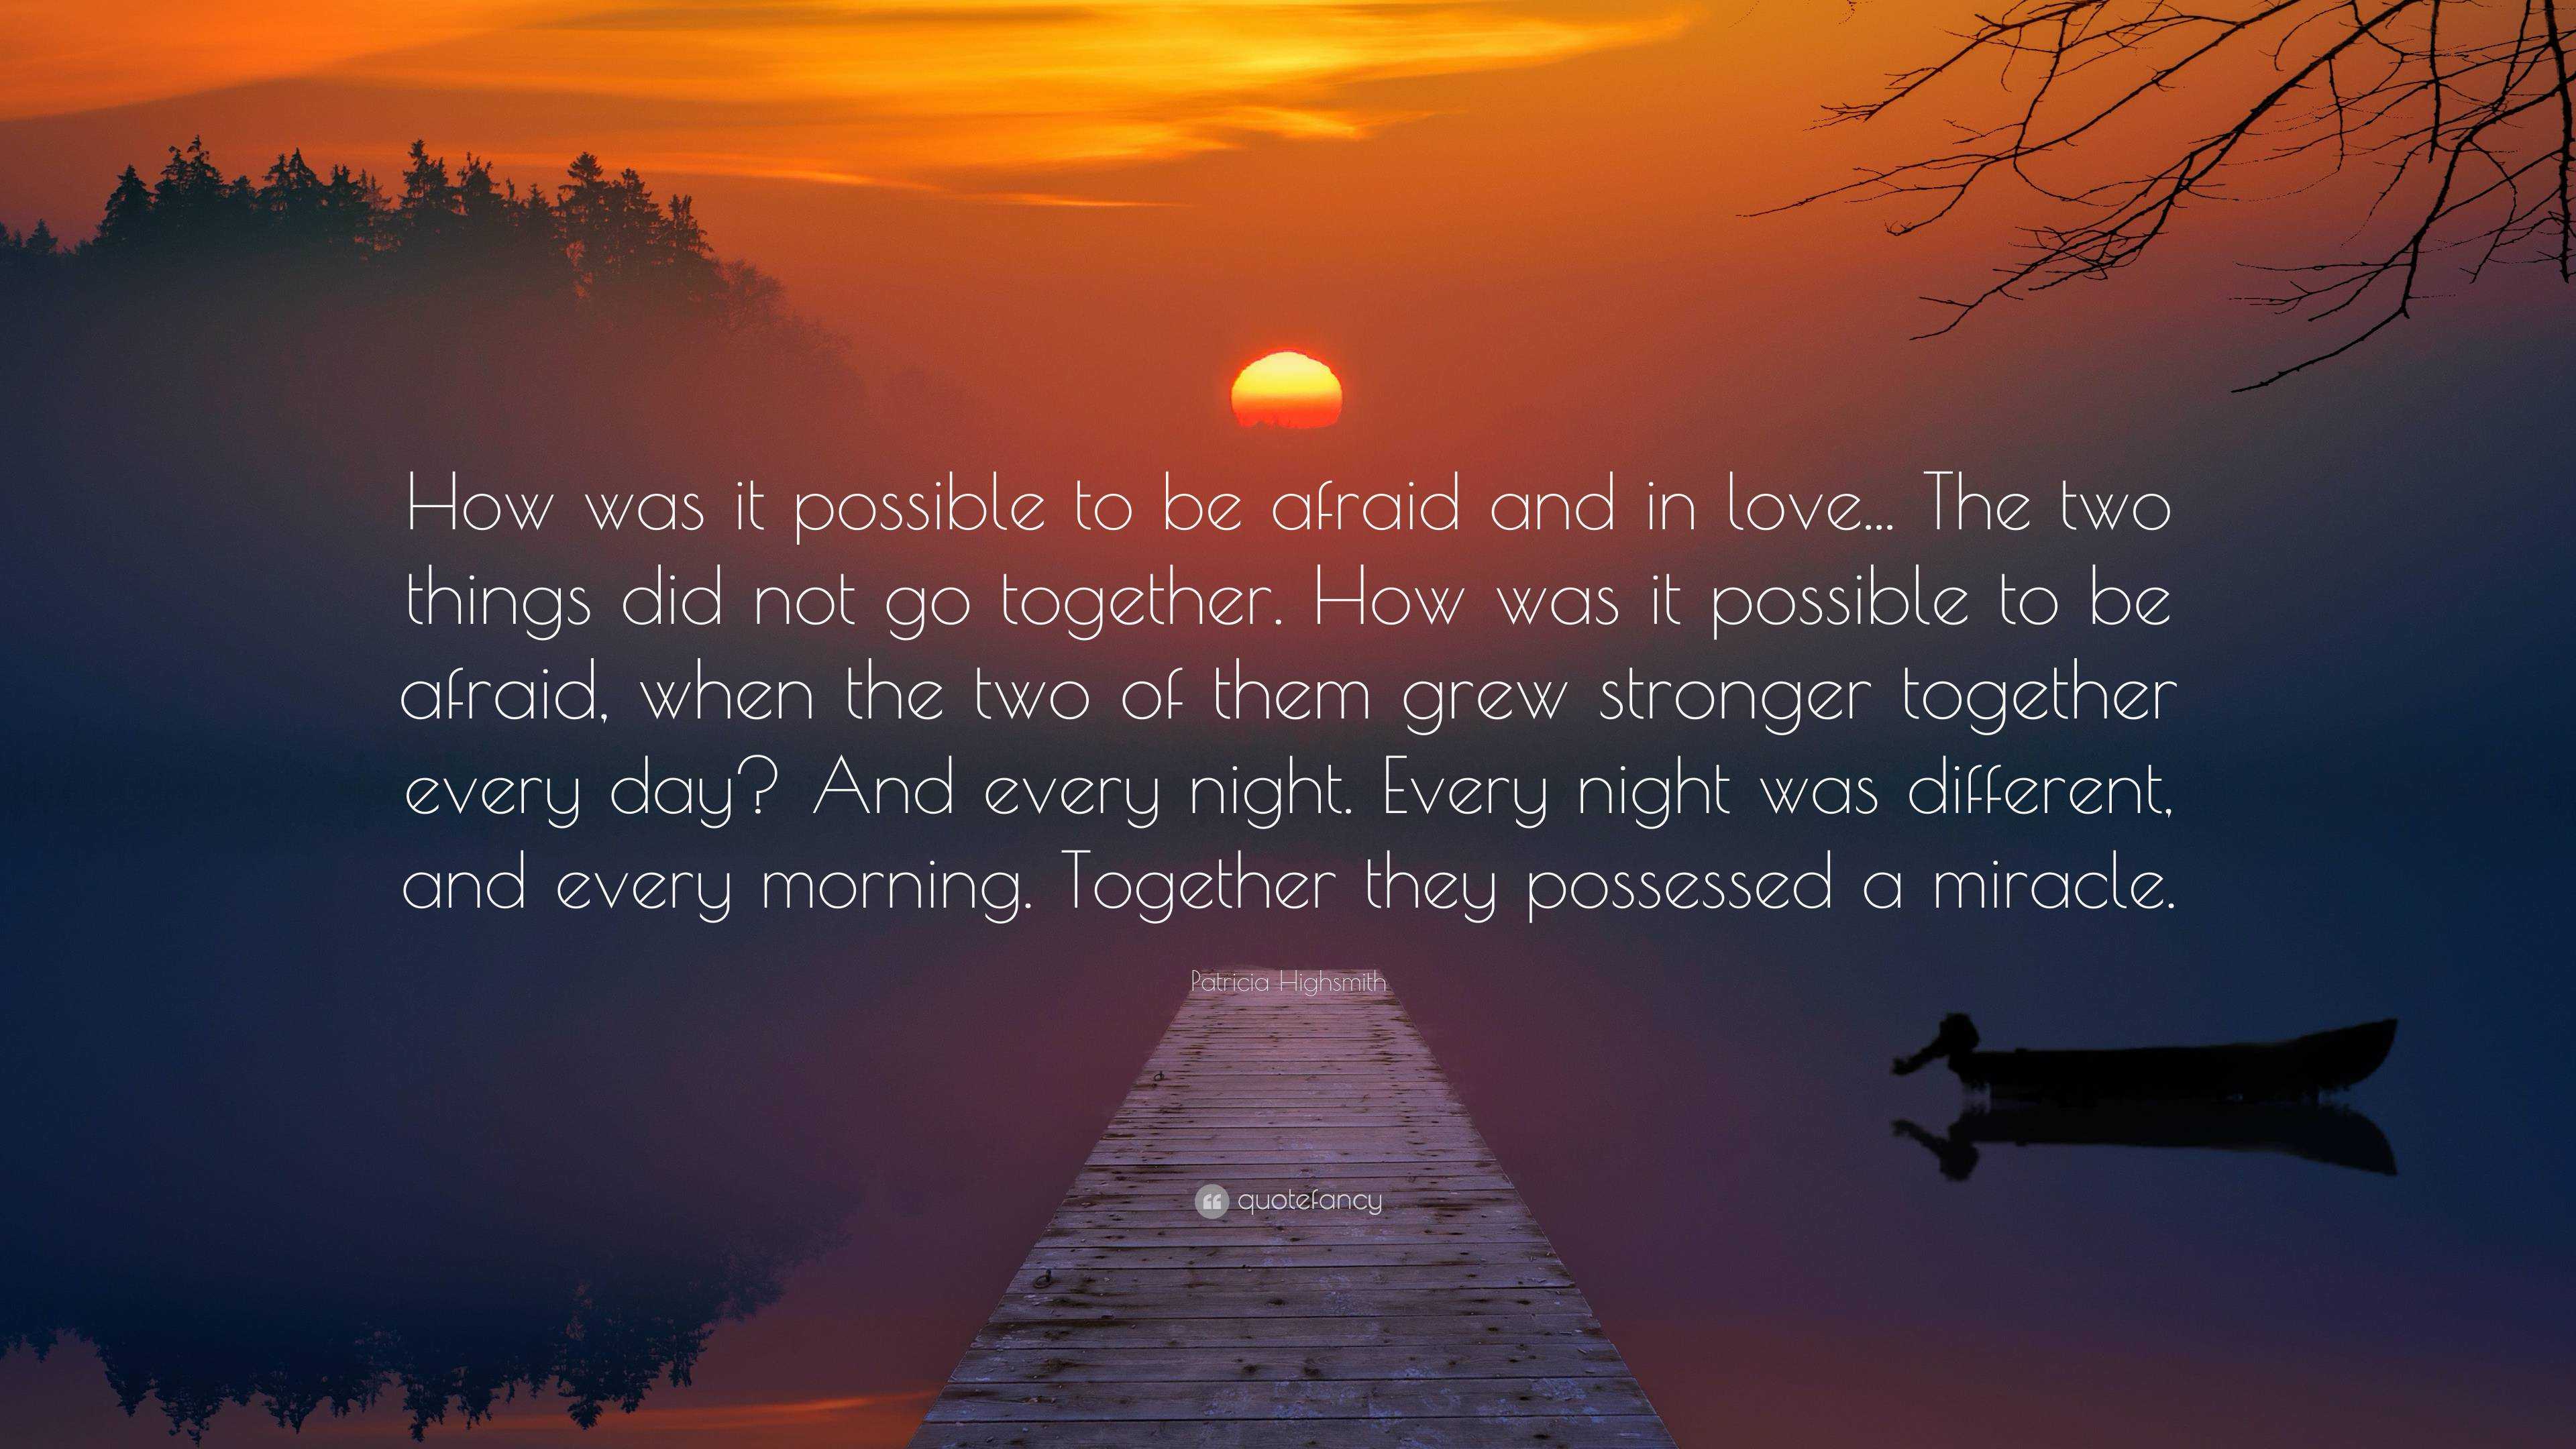 Patricia Highsmith Quote: “How was it possible to be afraid and in love ...